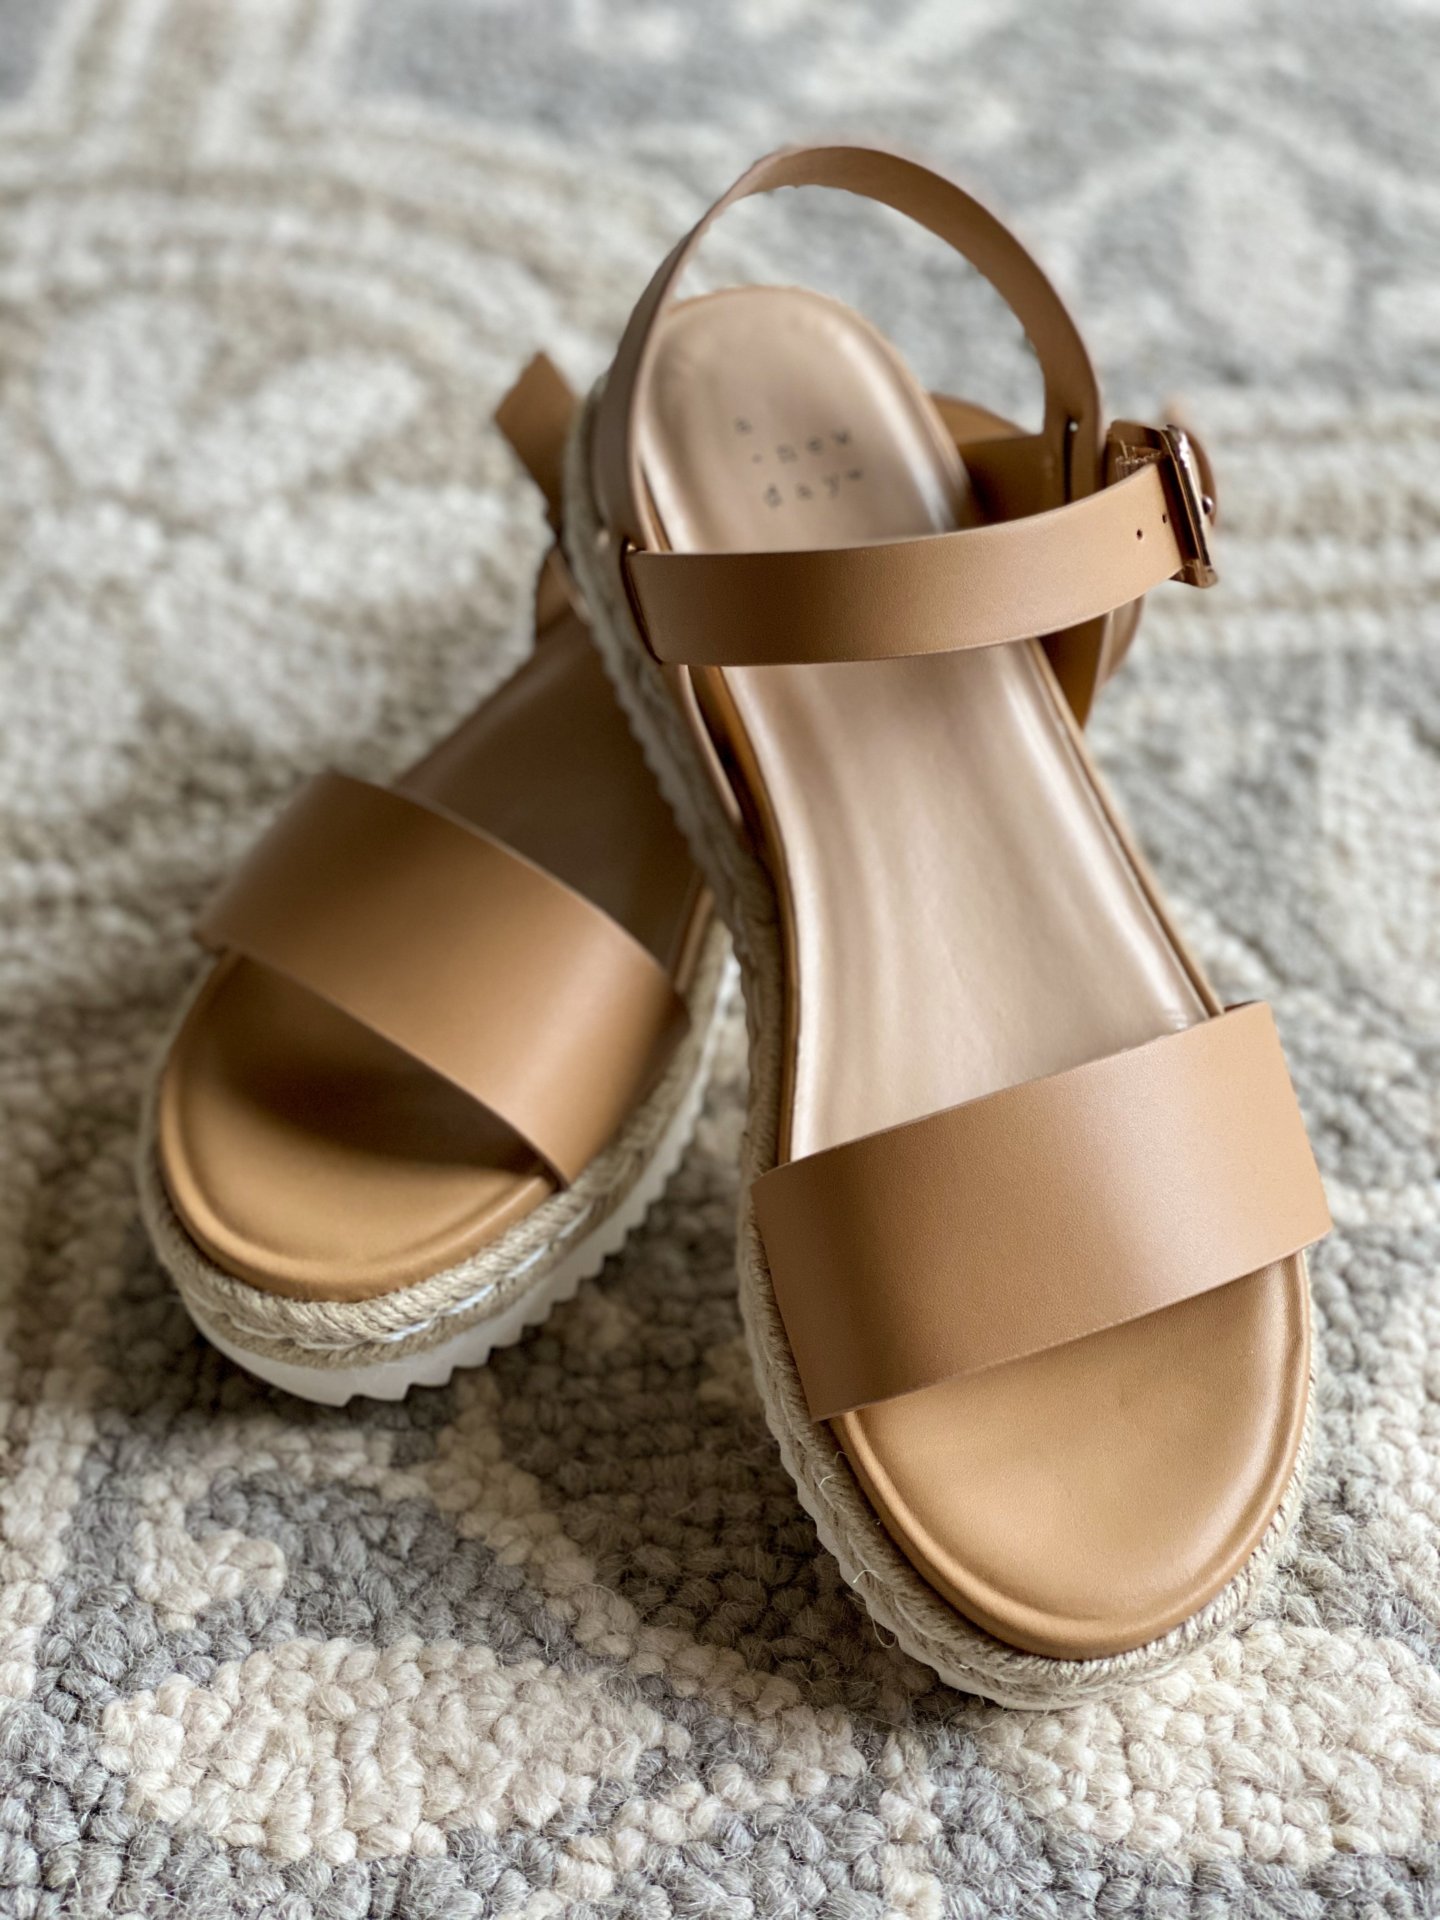 Target sandals  ||  Sandal season 2020  ||  Nail salon safety tips you need to know